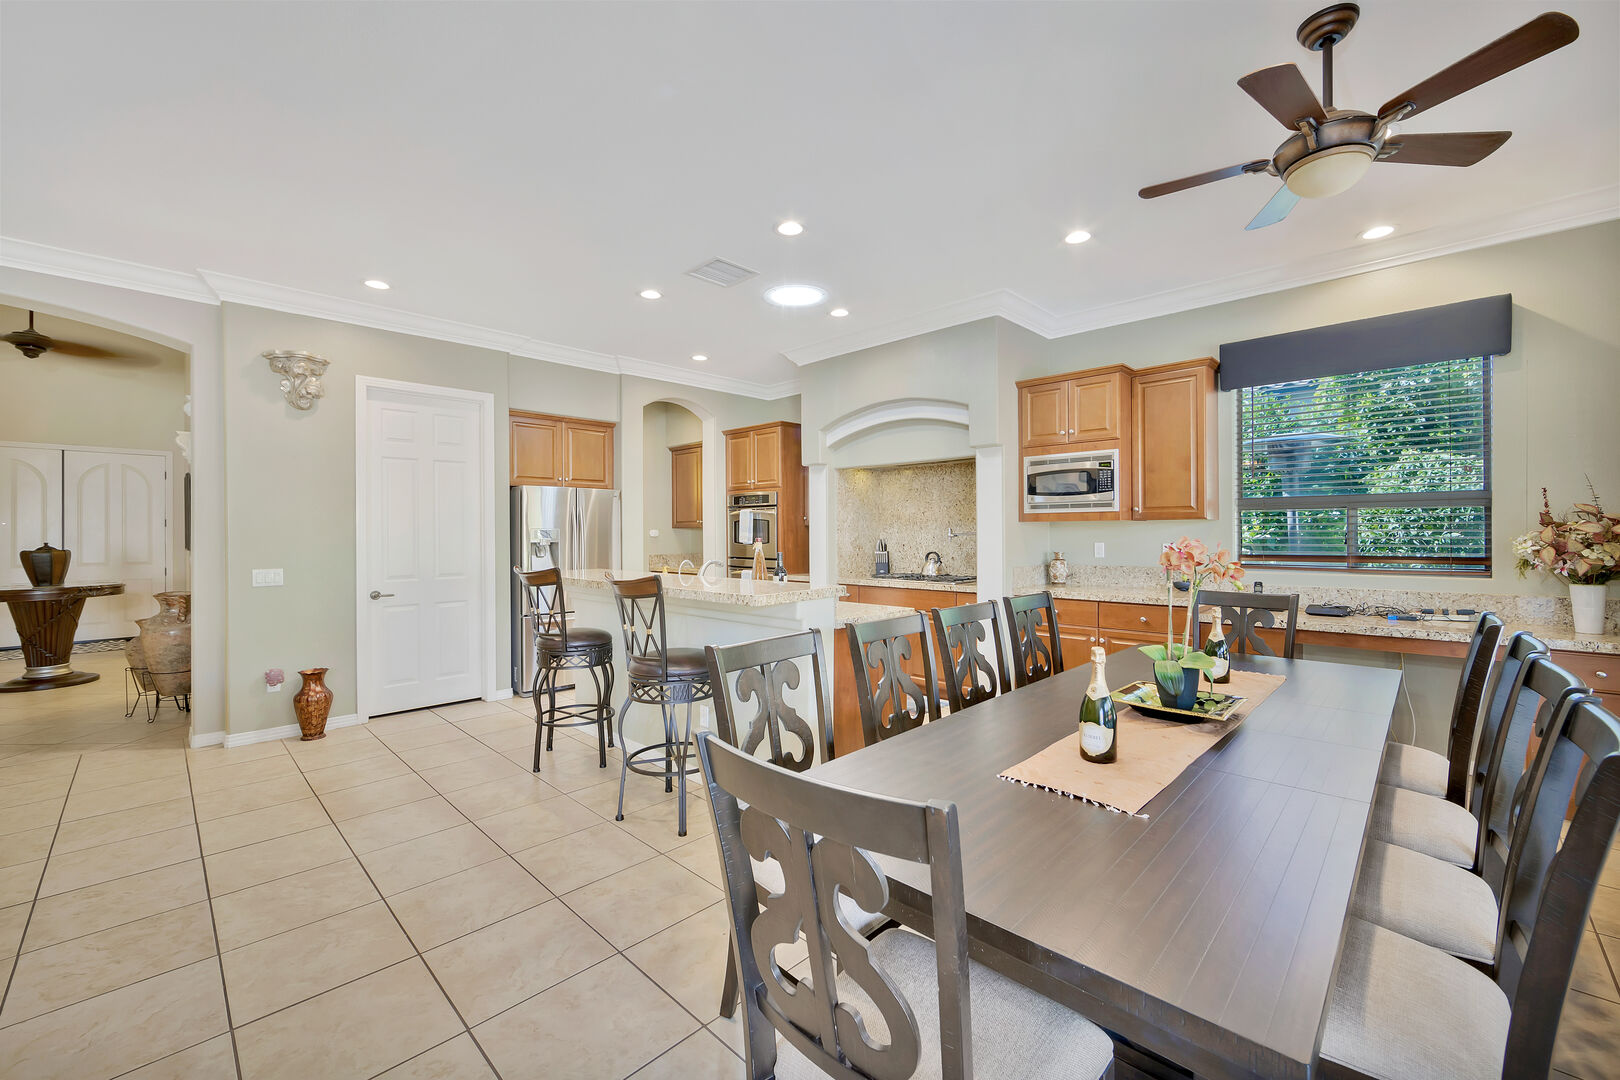 Dinning room for TEN, plus more at the countertop!